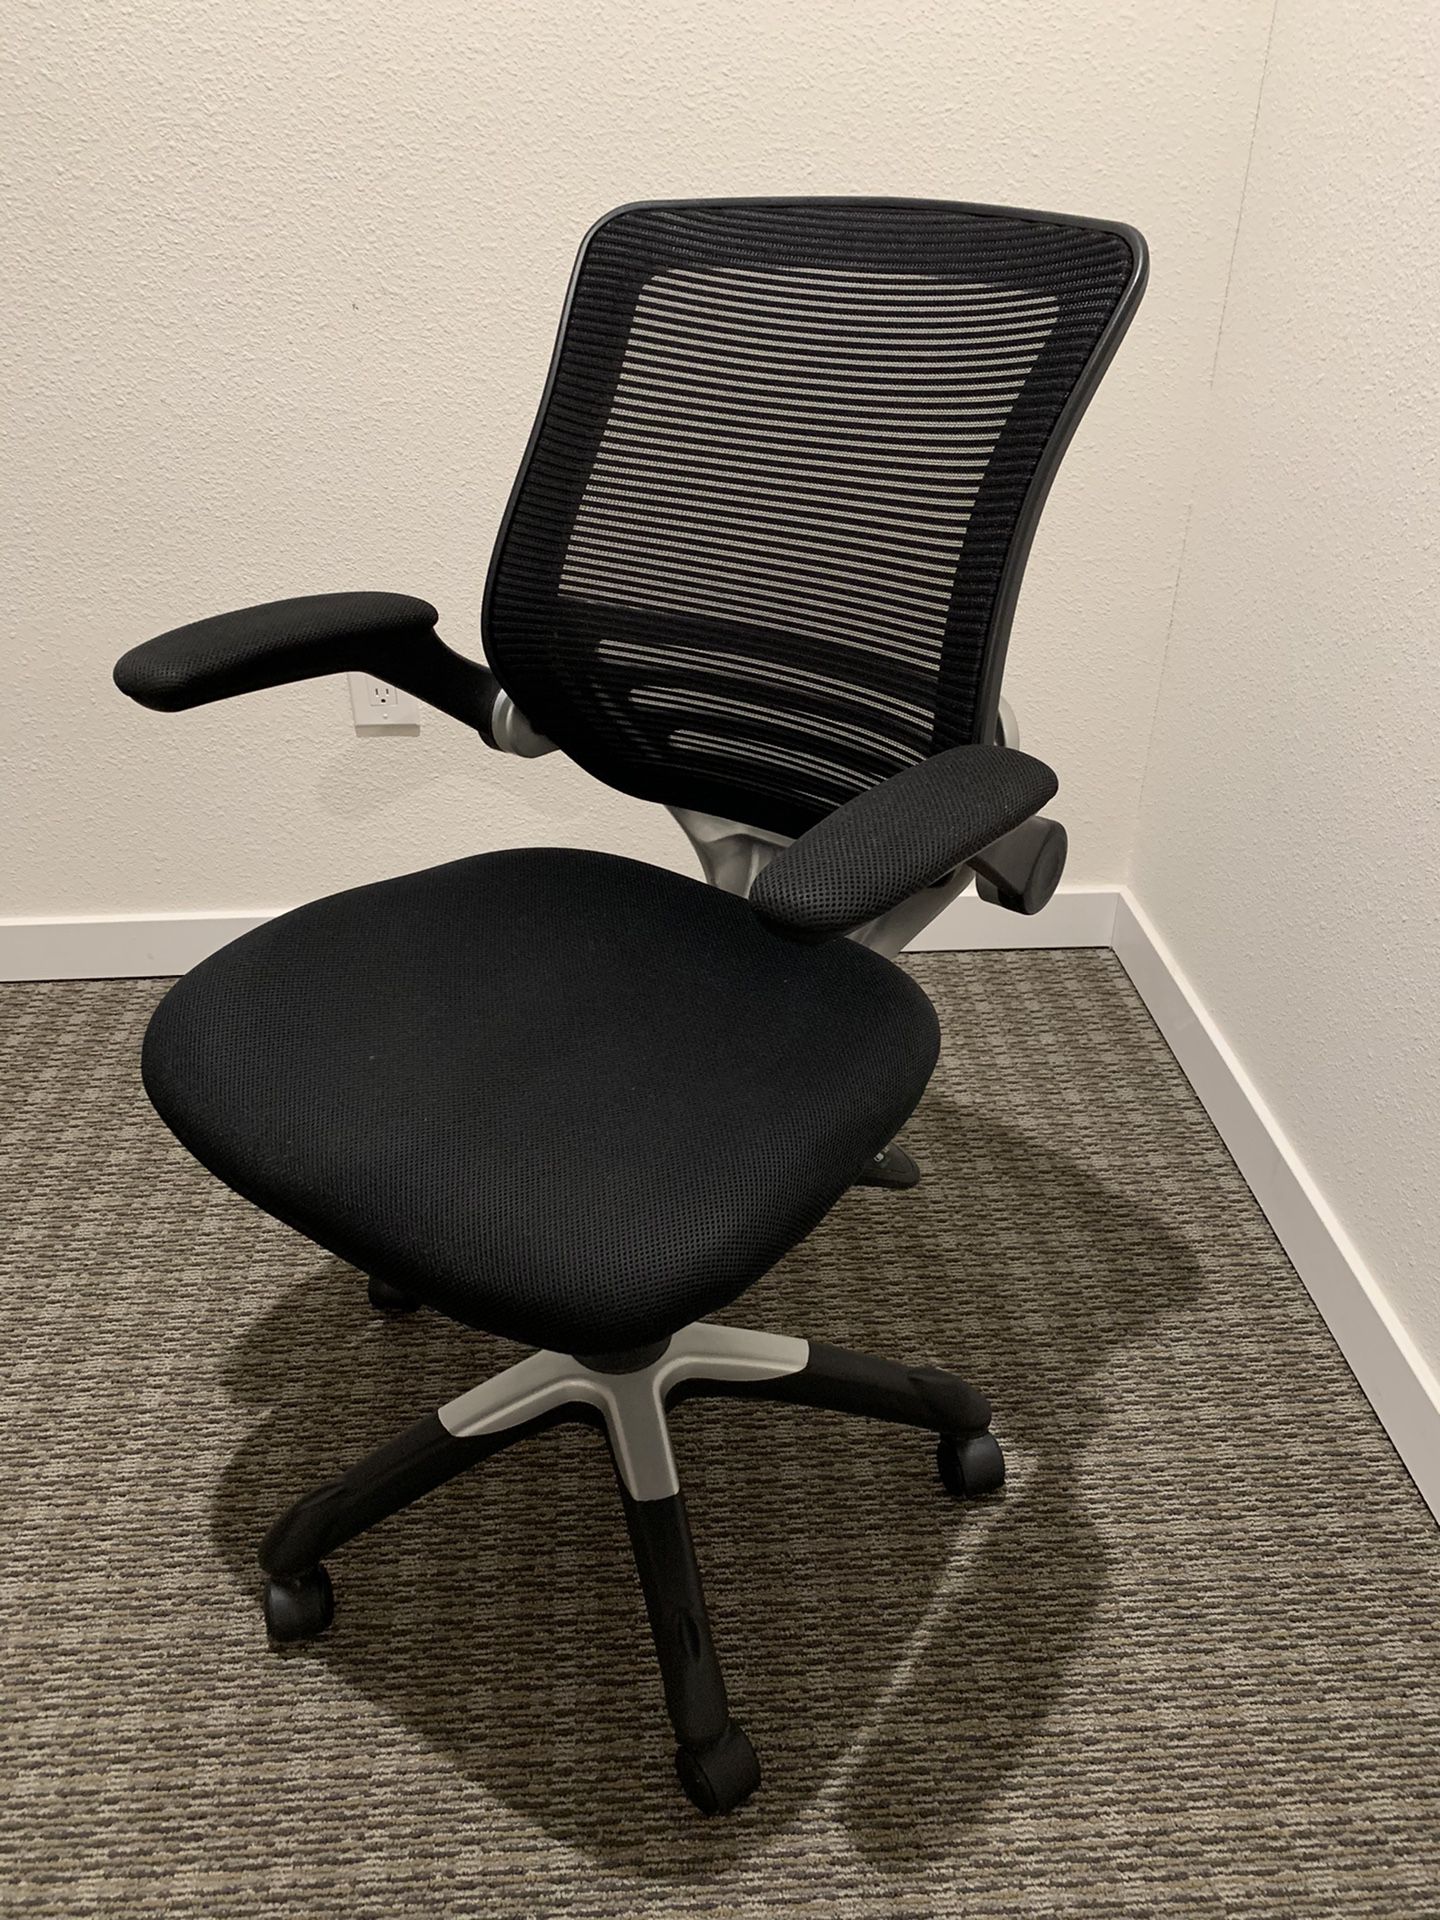 Office Chair - FREE